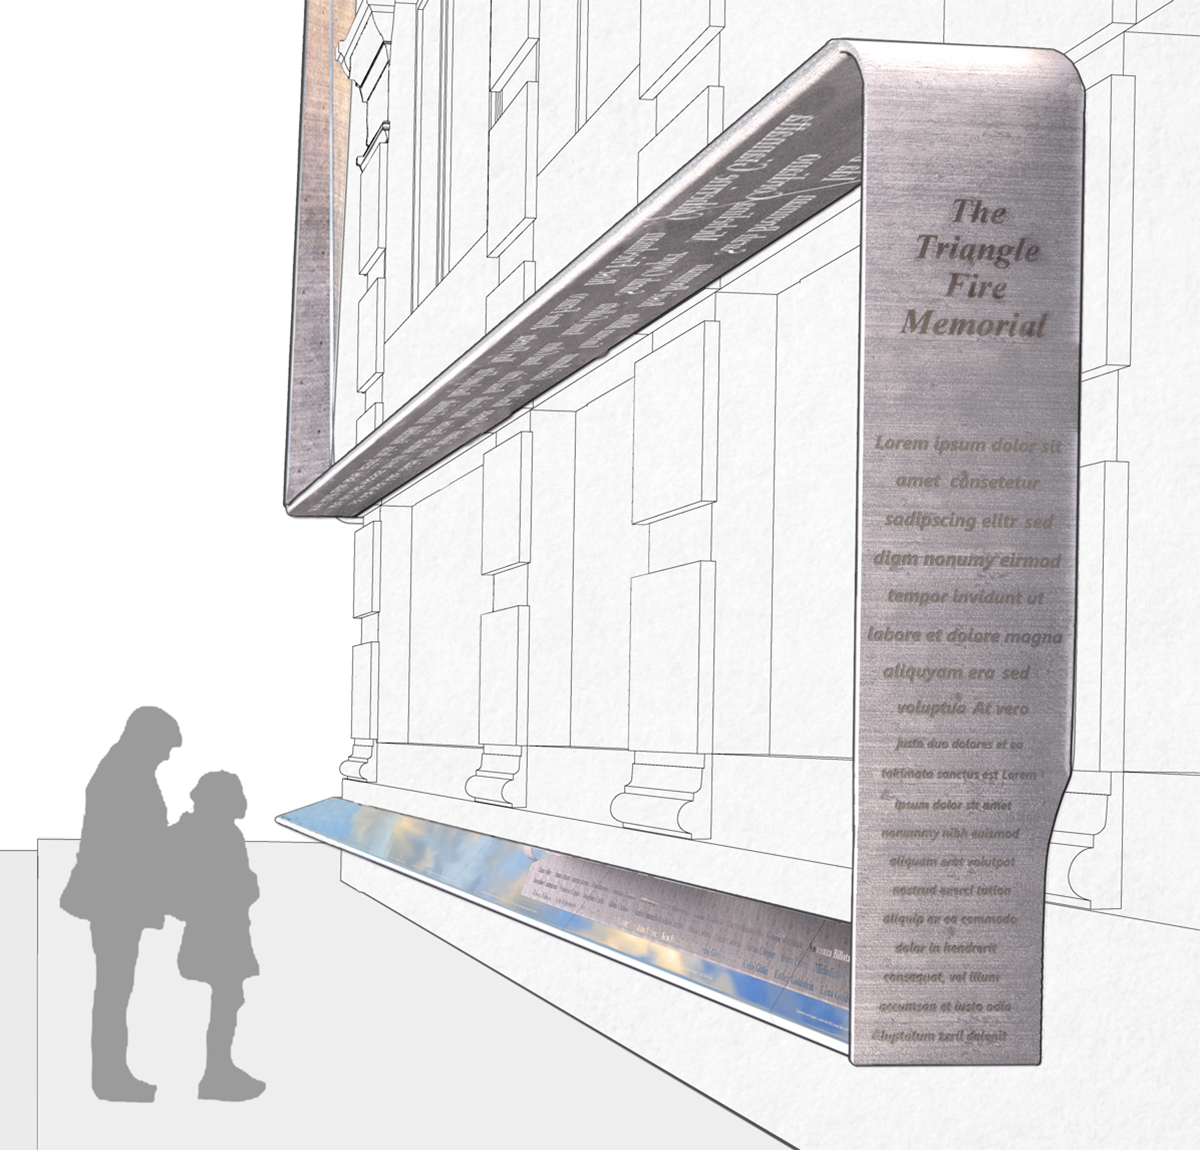 Rendering of the Triangle Fire Memorial